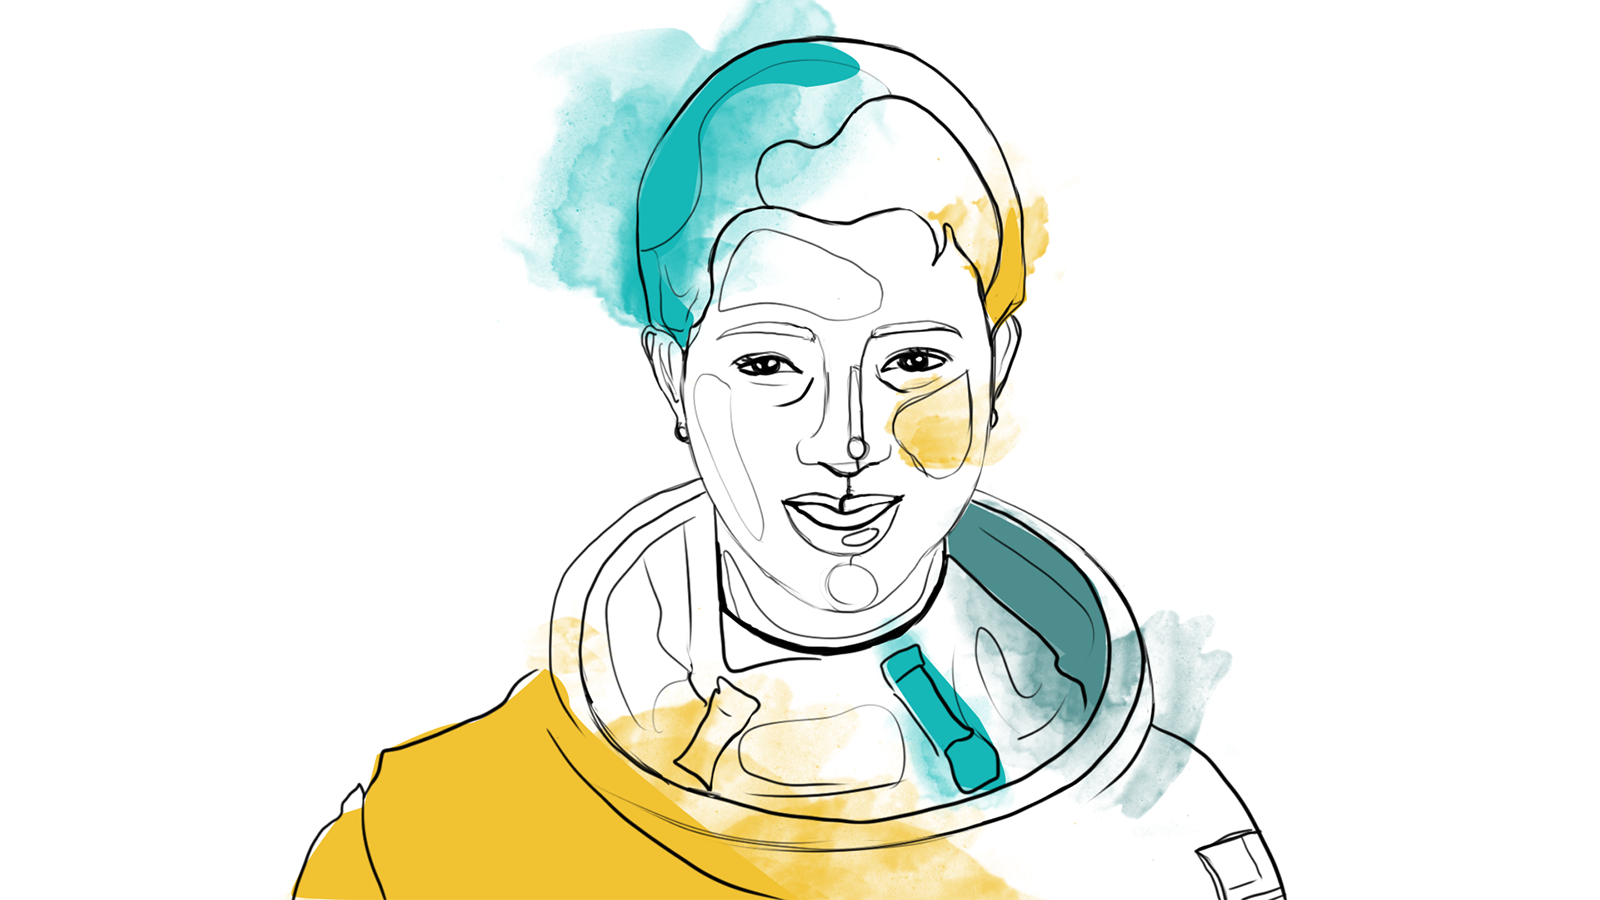 Mae Jemison, The first Black woman in space, New Scientist